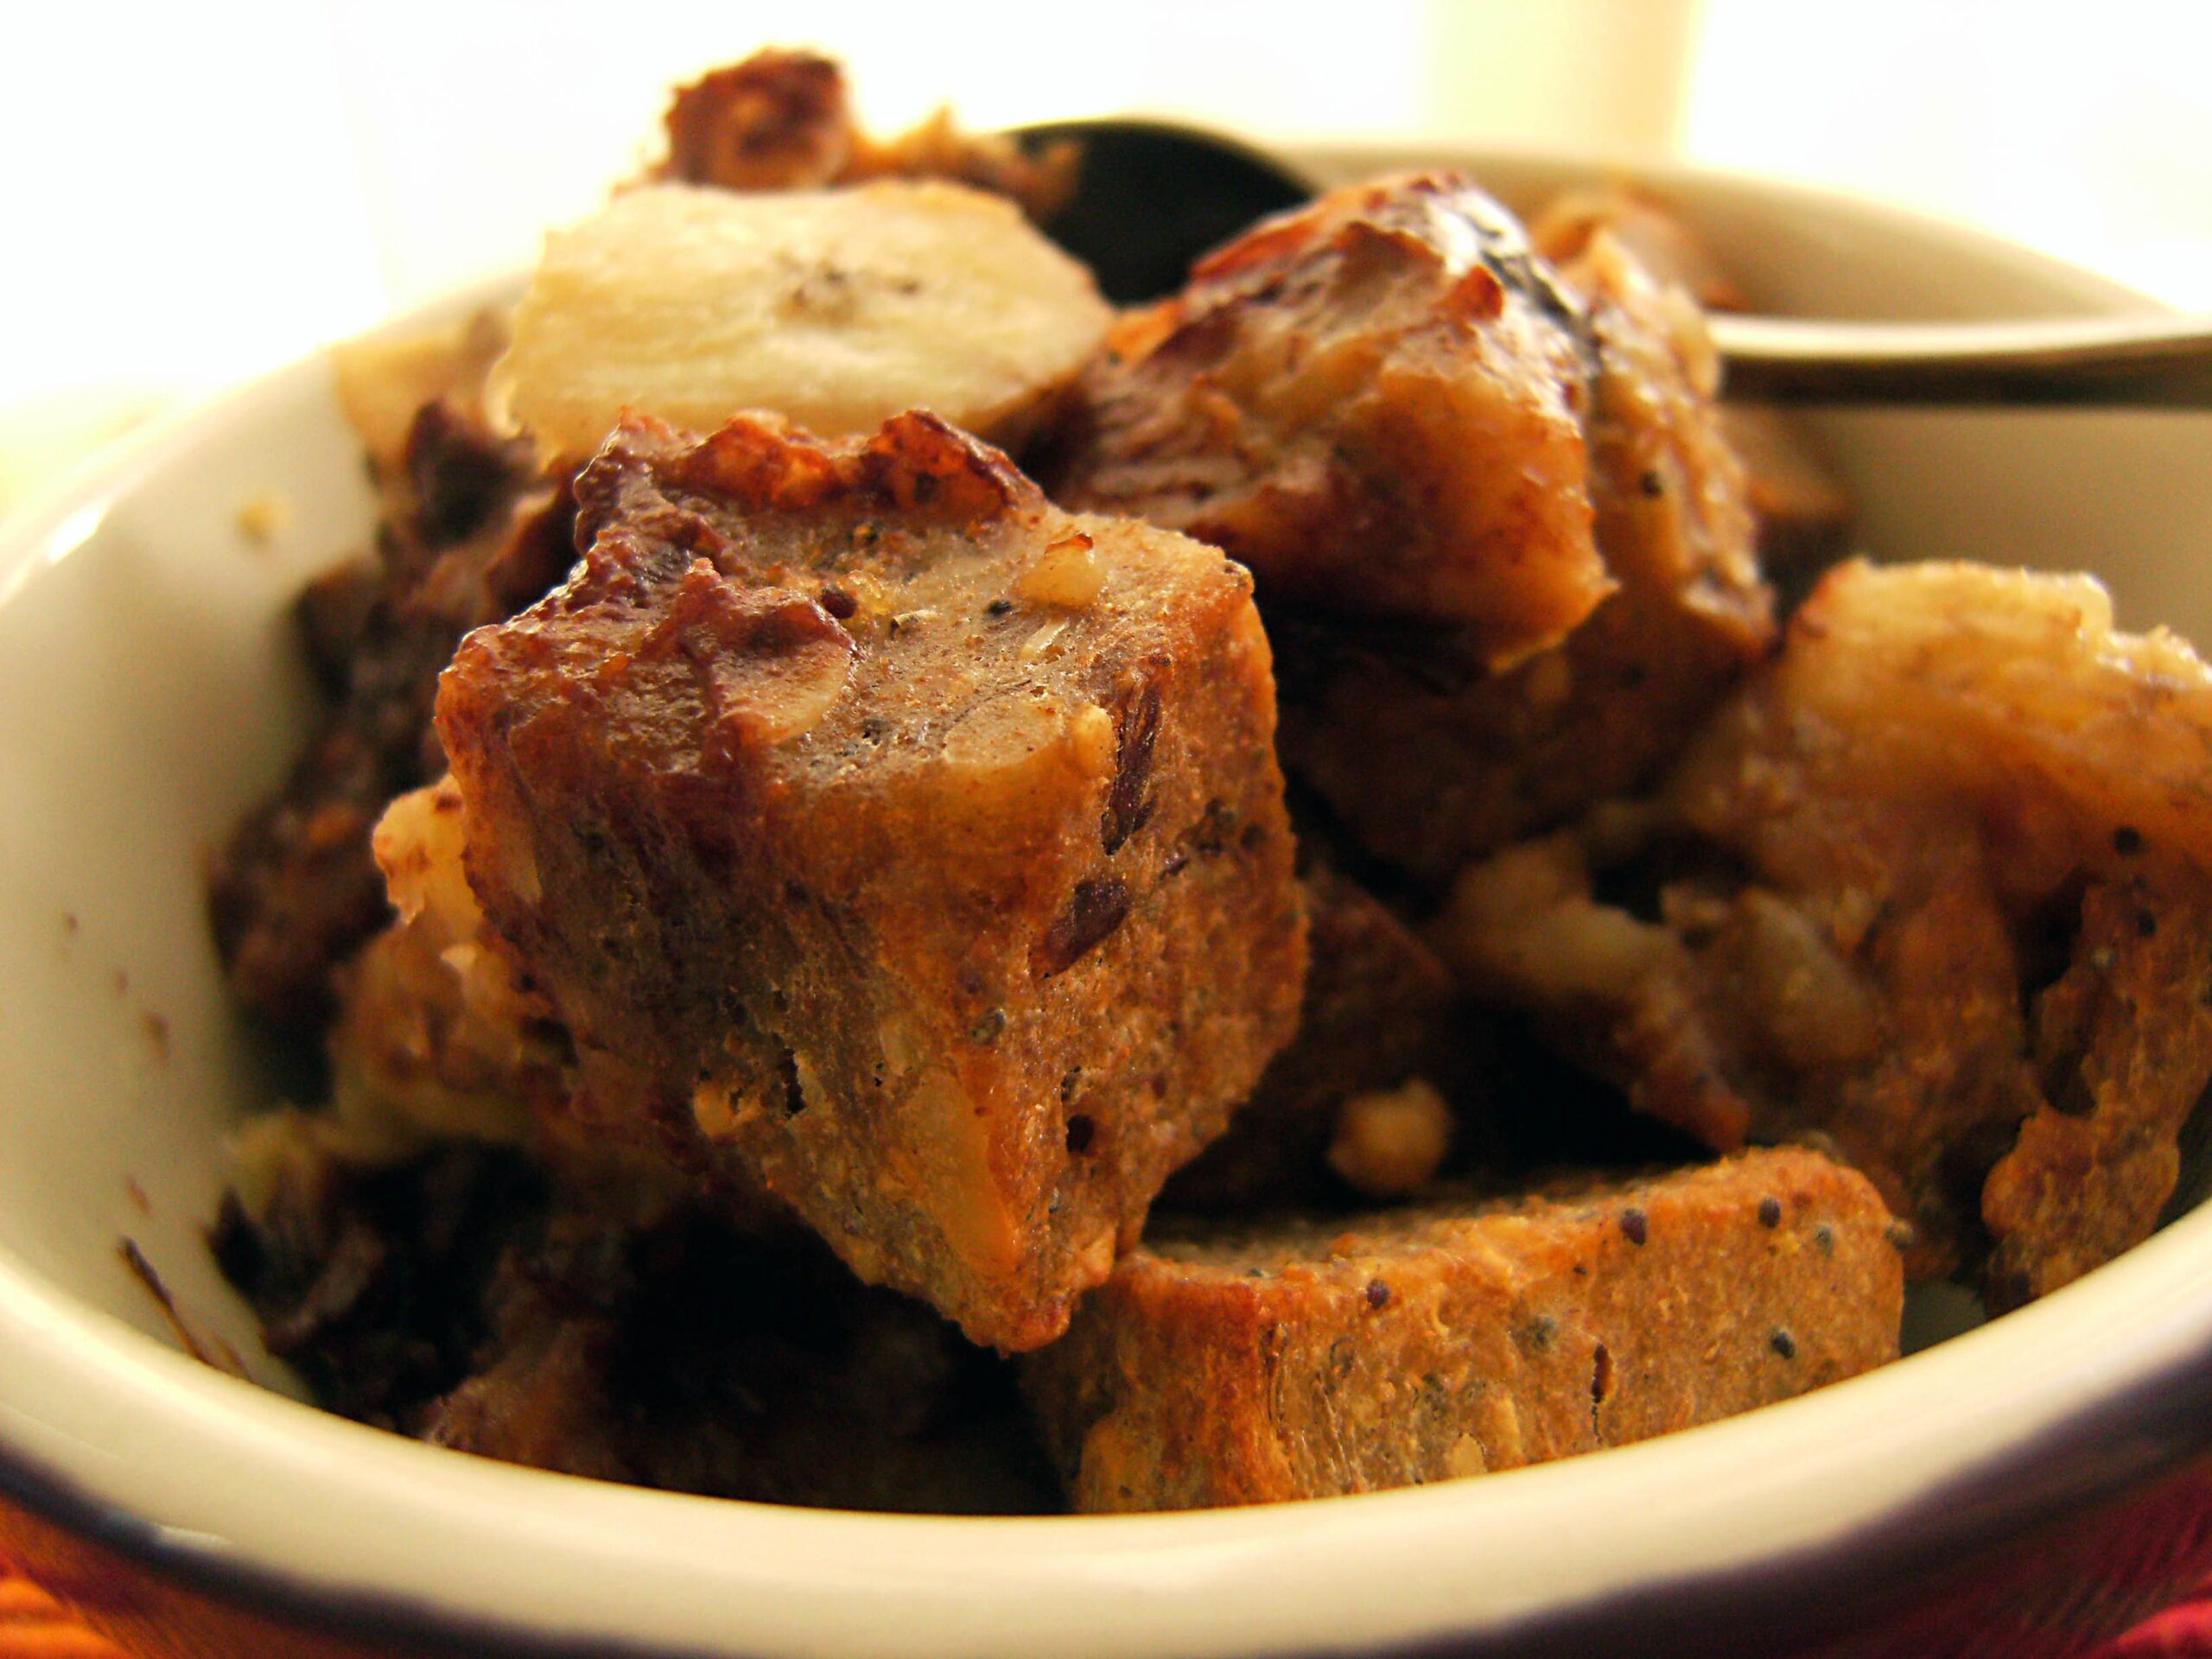 Indulge in Decadent Banana Chocolate Chip Bread Pudding